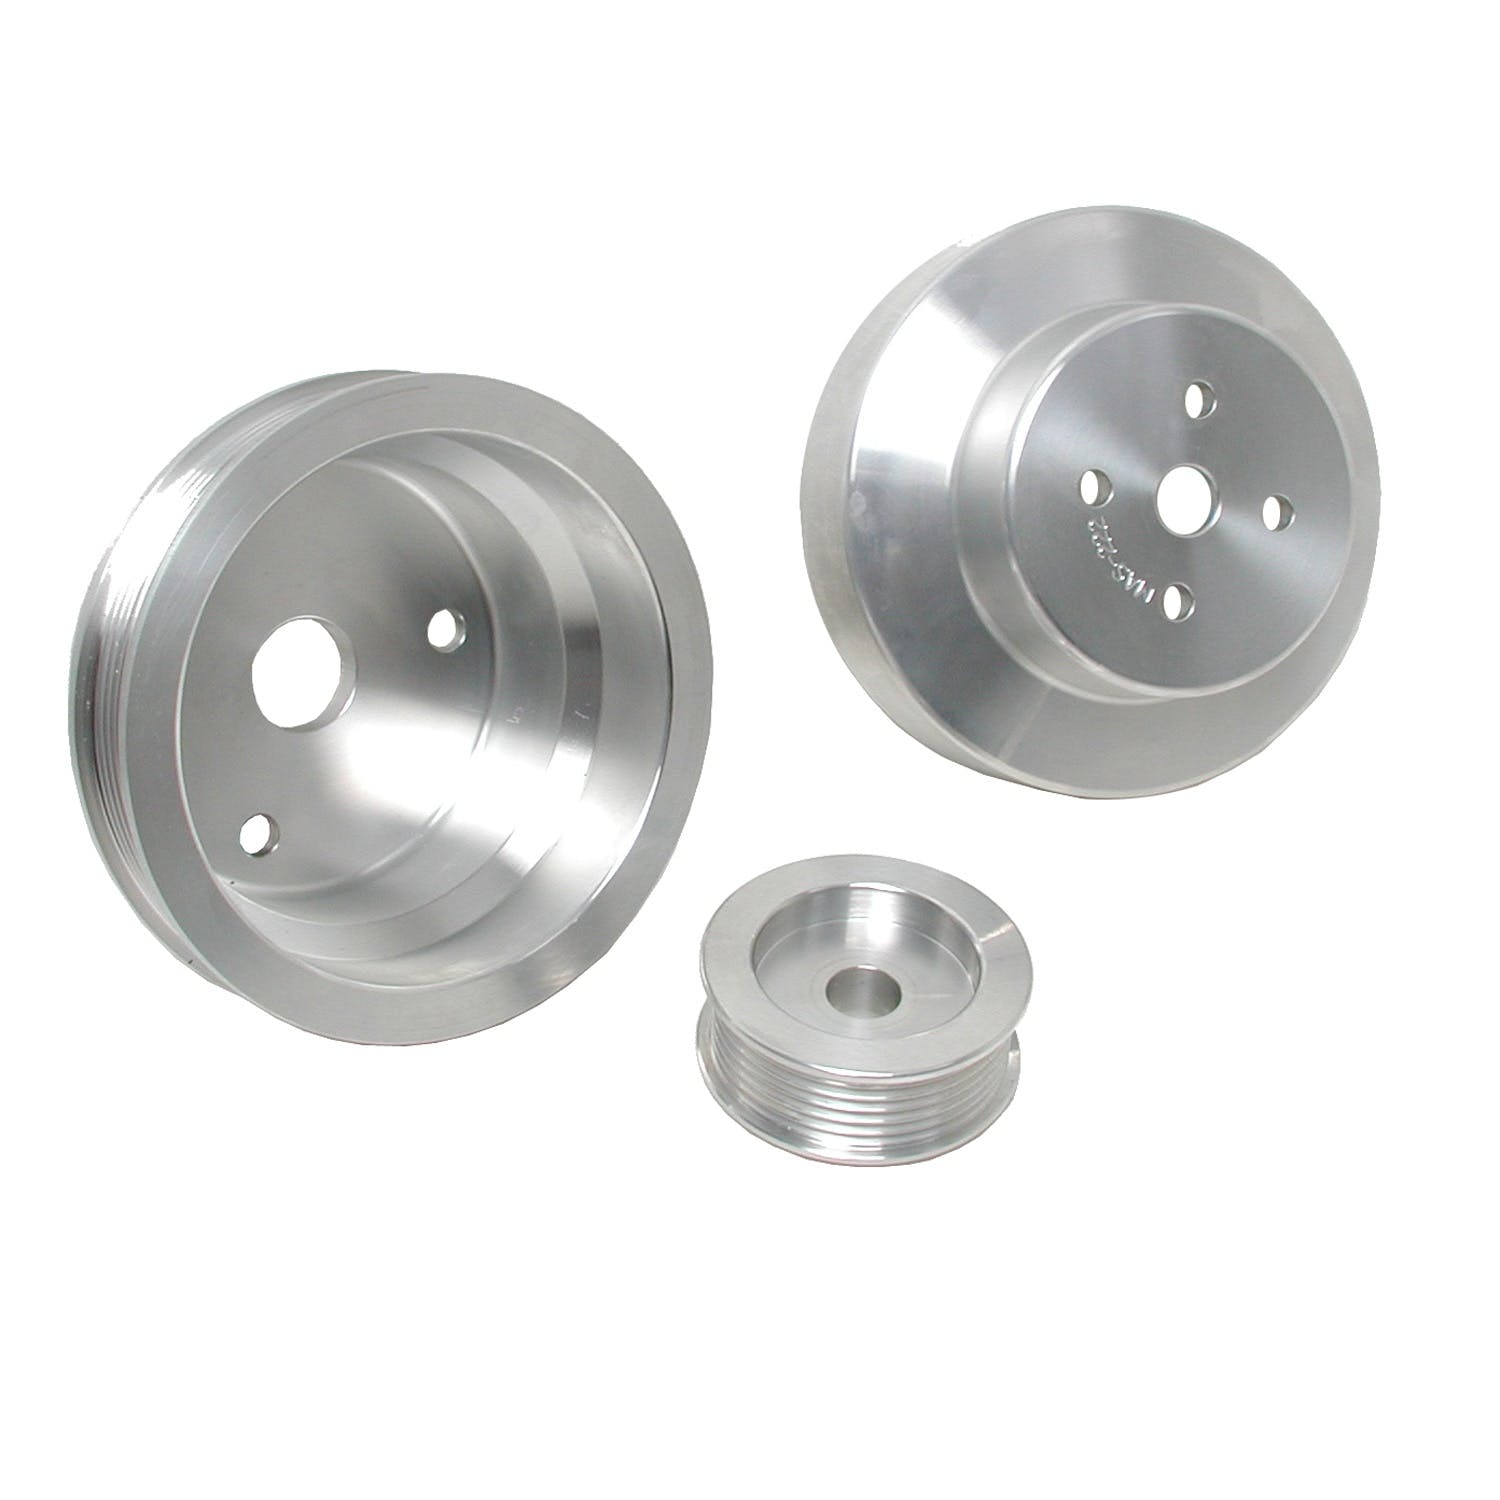 BBK Performance Parts 1603 Power-Plus Series Underdrive Pulley System